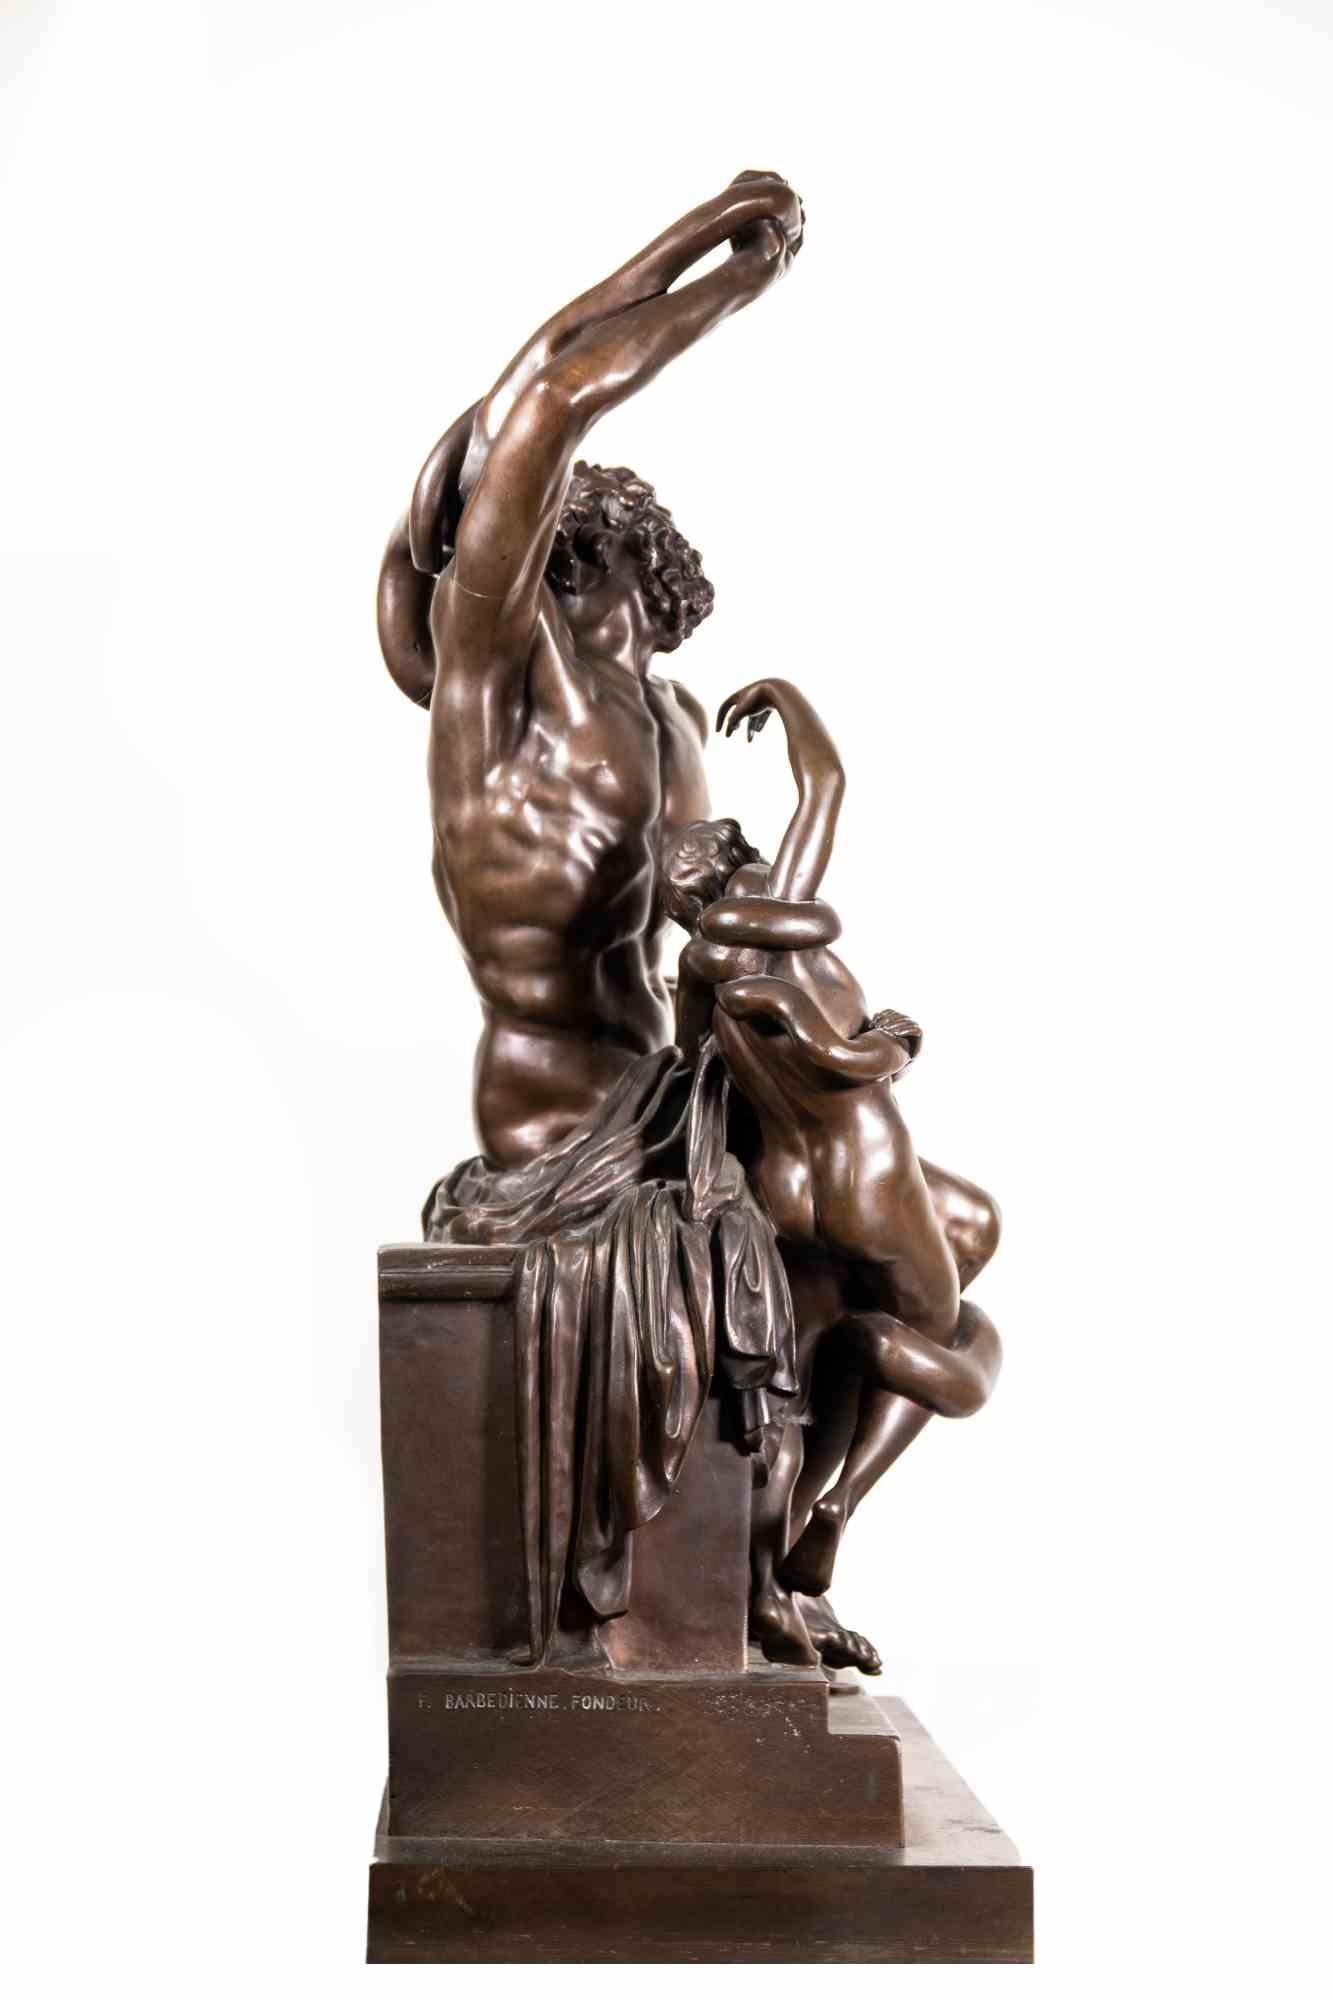 Laocoon Group is an original Modern artwork realized by Ferdinand Barbedienne (6 August 1810 – 21 March 1892) in the Second half of the 19th Century.

Bronze sculpture after the Antique.

F. Barbedienne Fondeur foundry mark is present on the base.